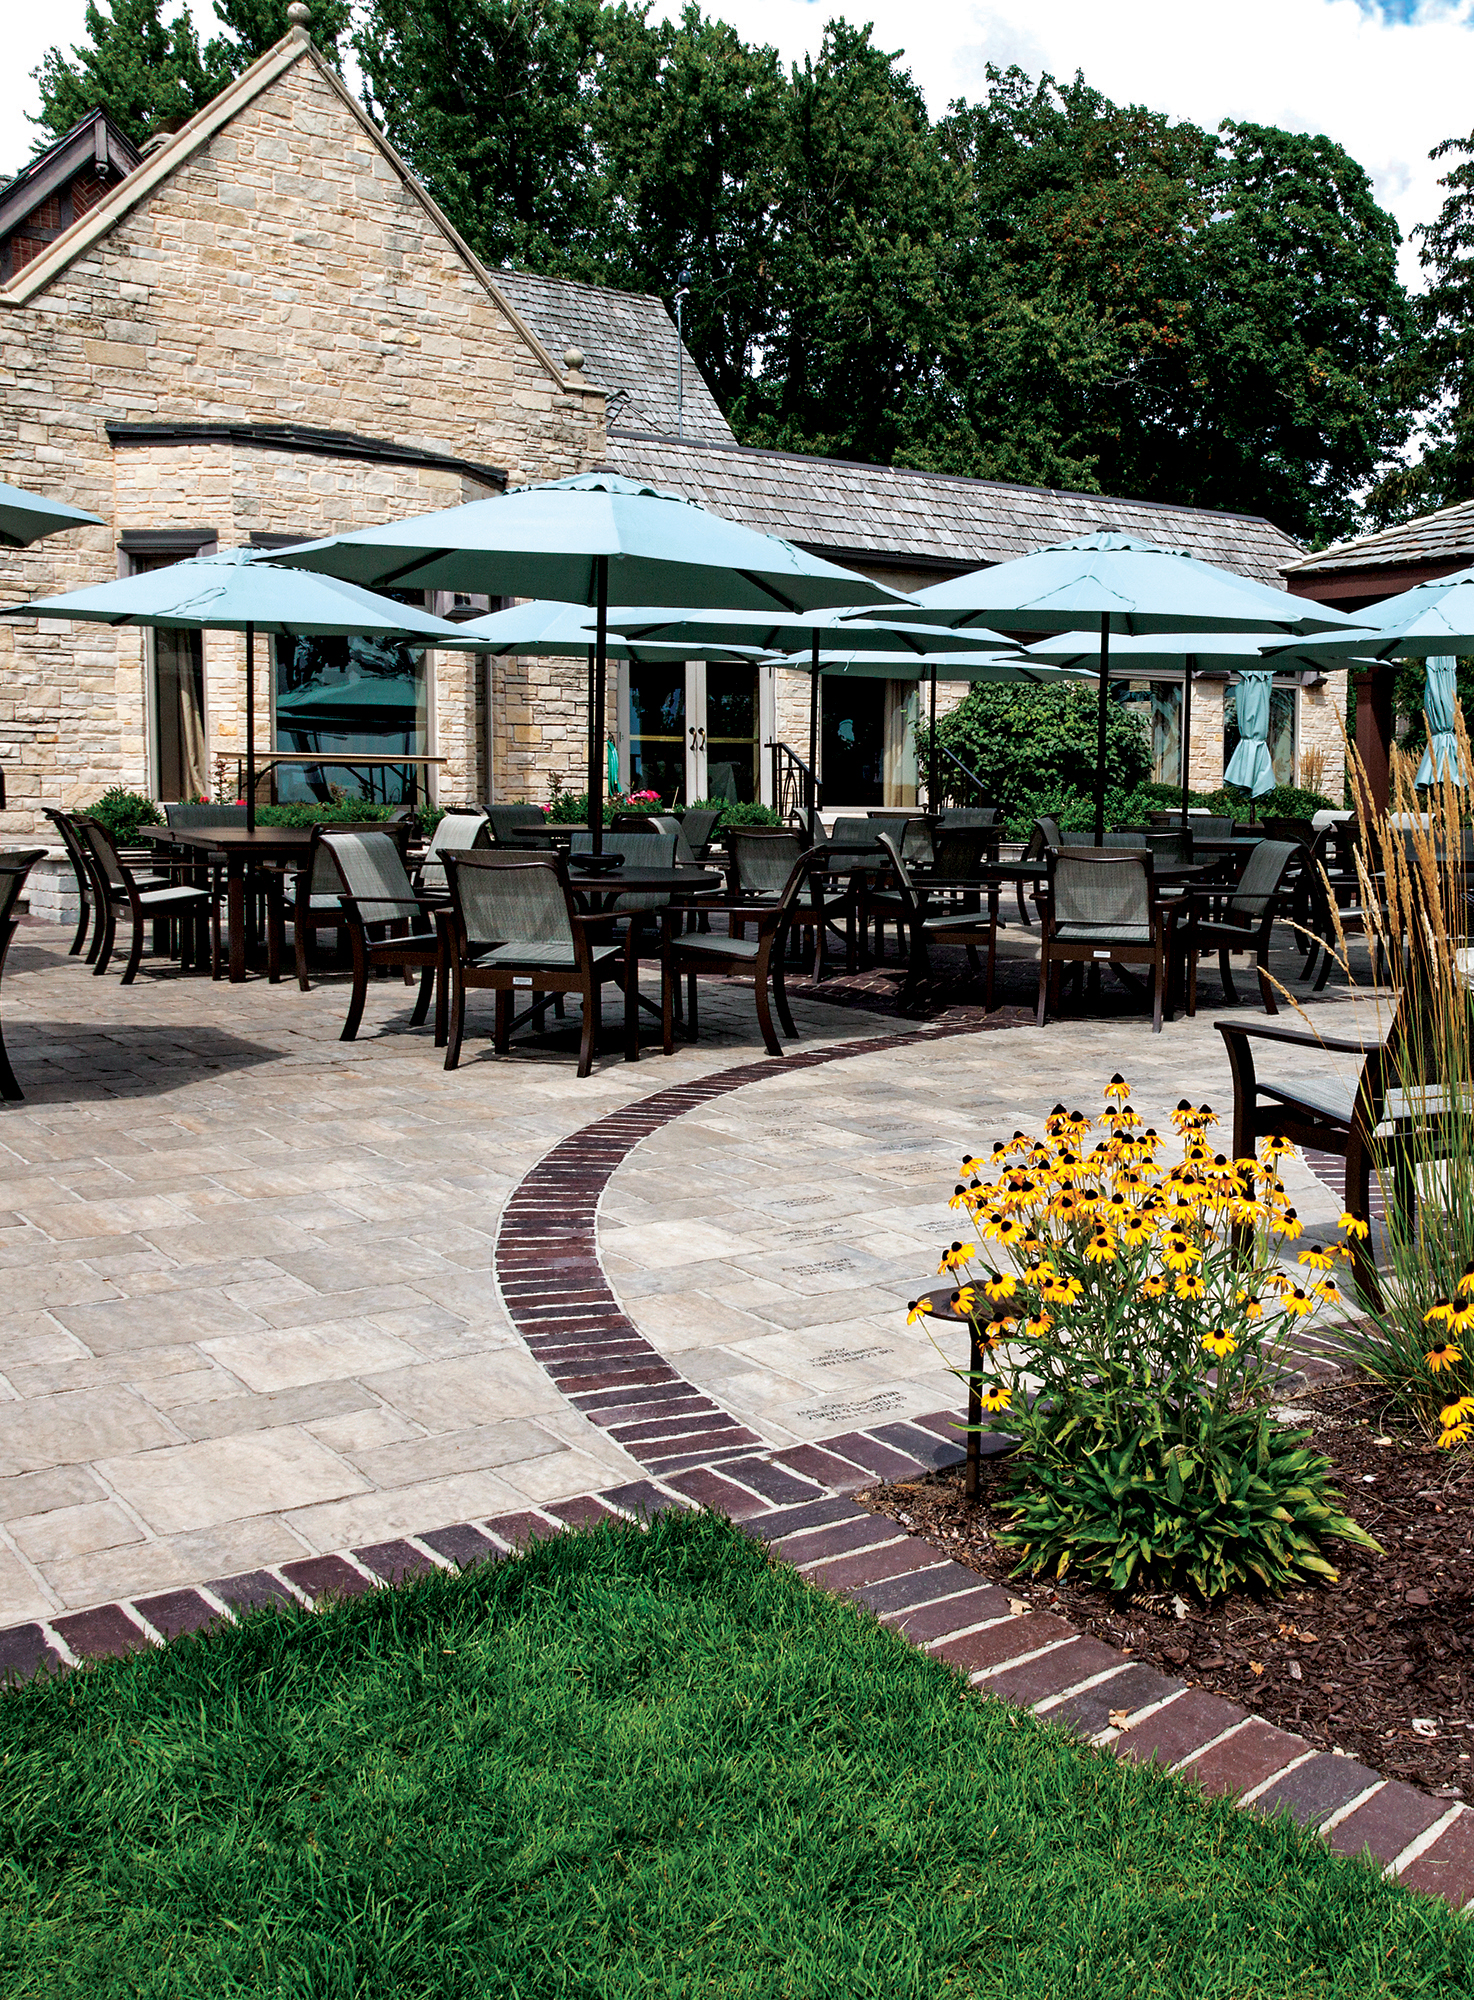 This entrance has patio furniture on Thornbury pavers with lines of contrasting pavers extending to a garden in front of an Old Quarry wall.